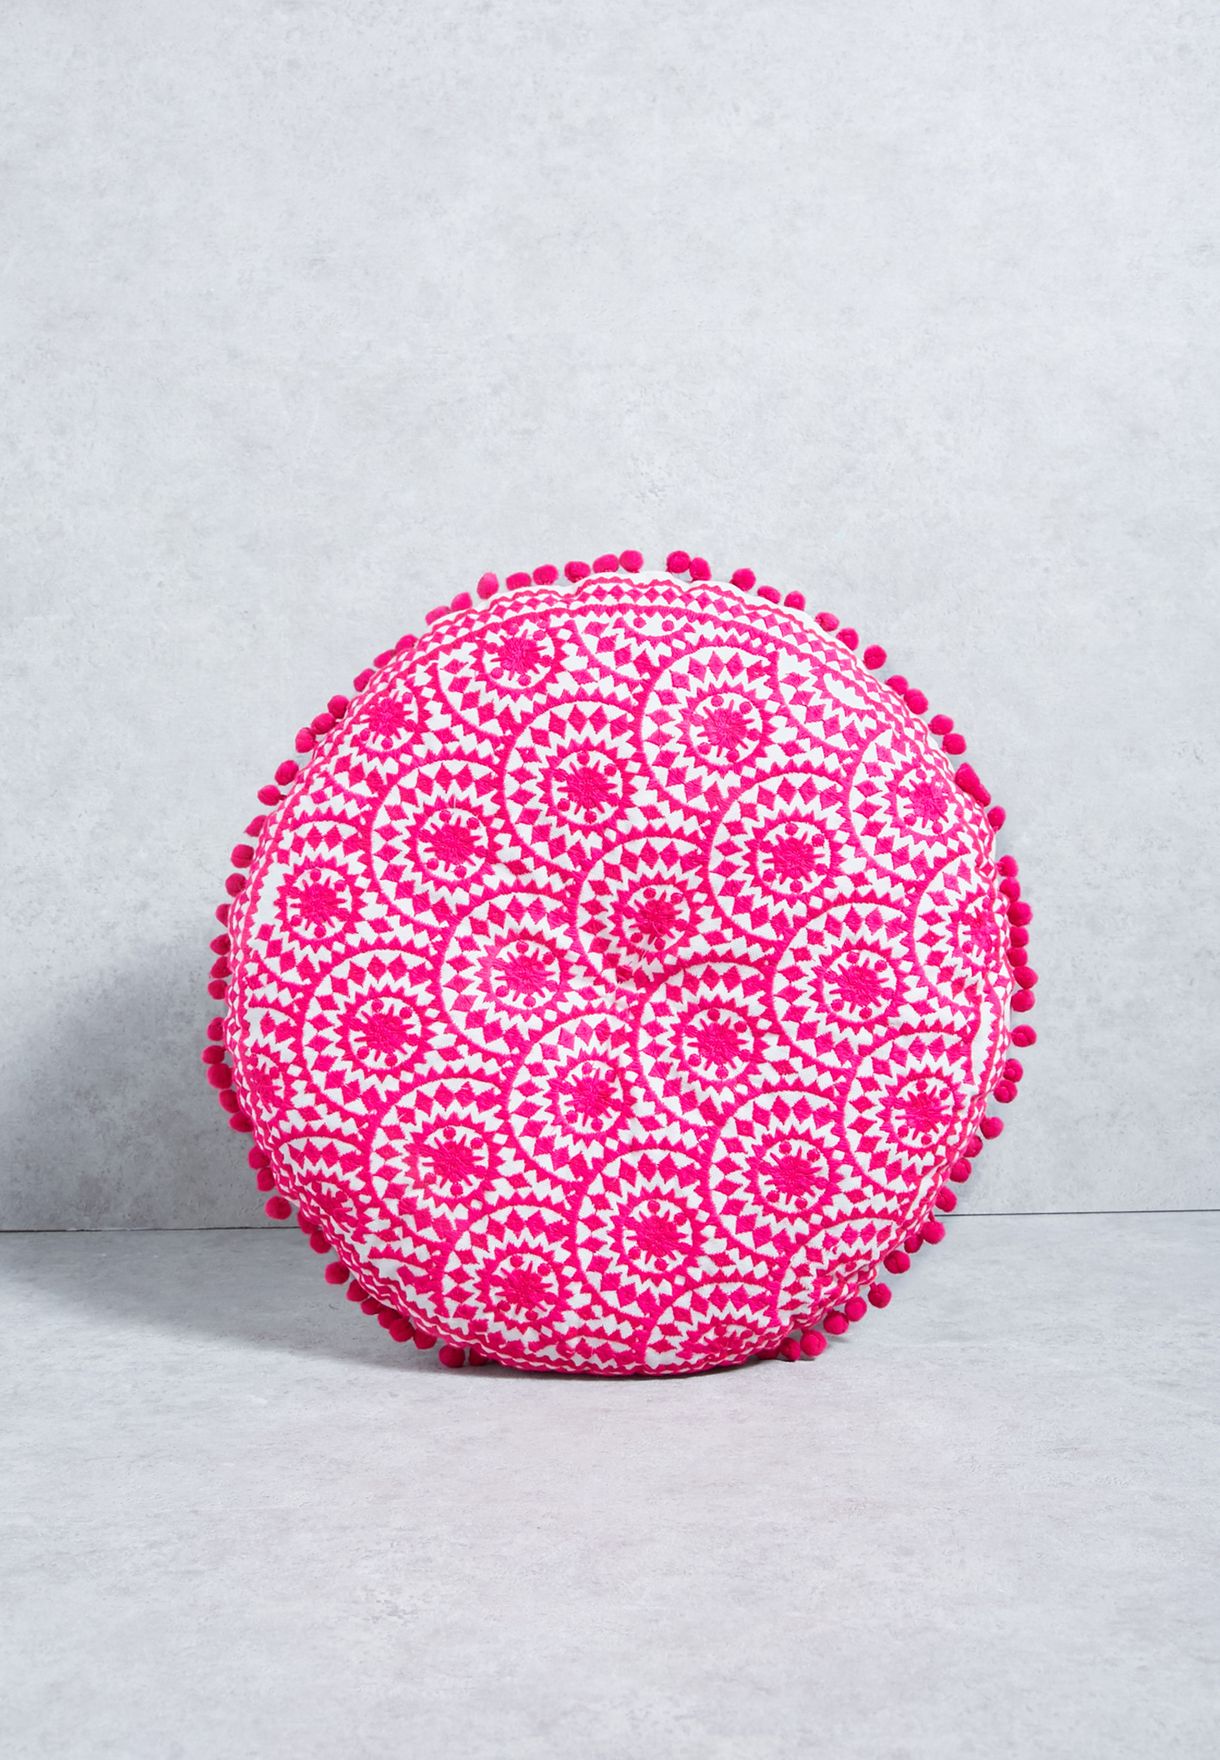 Round Casablanca Embroidered Cushion Insert Included